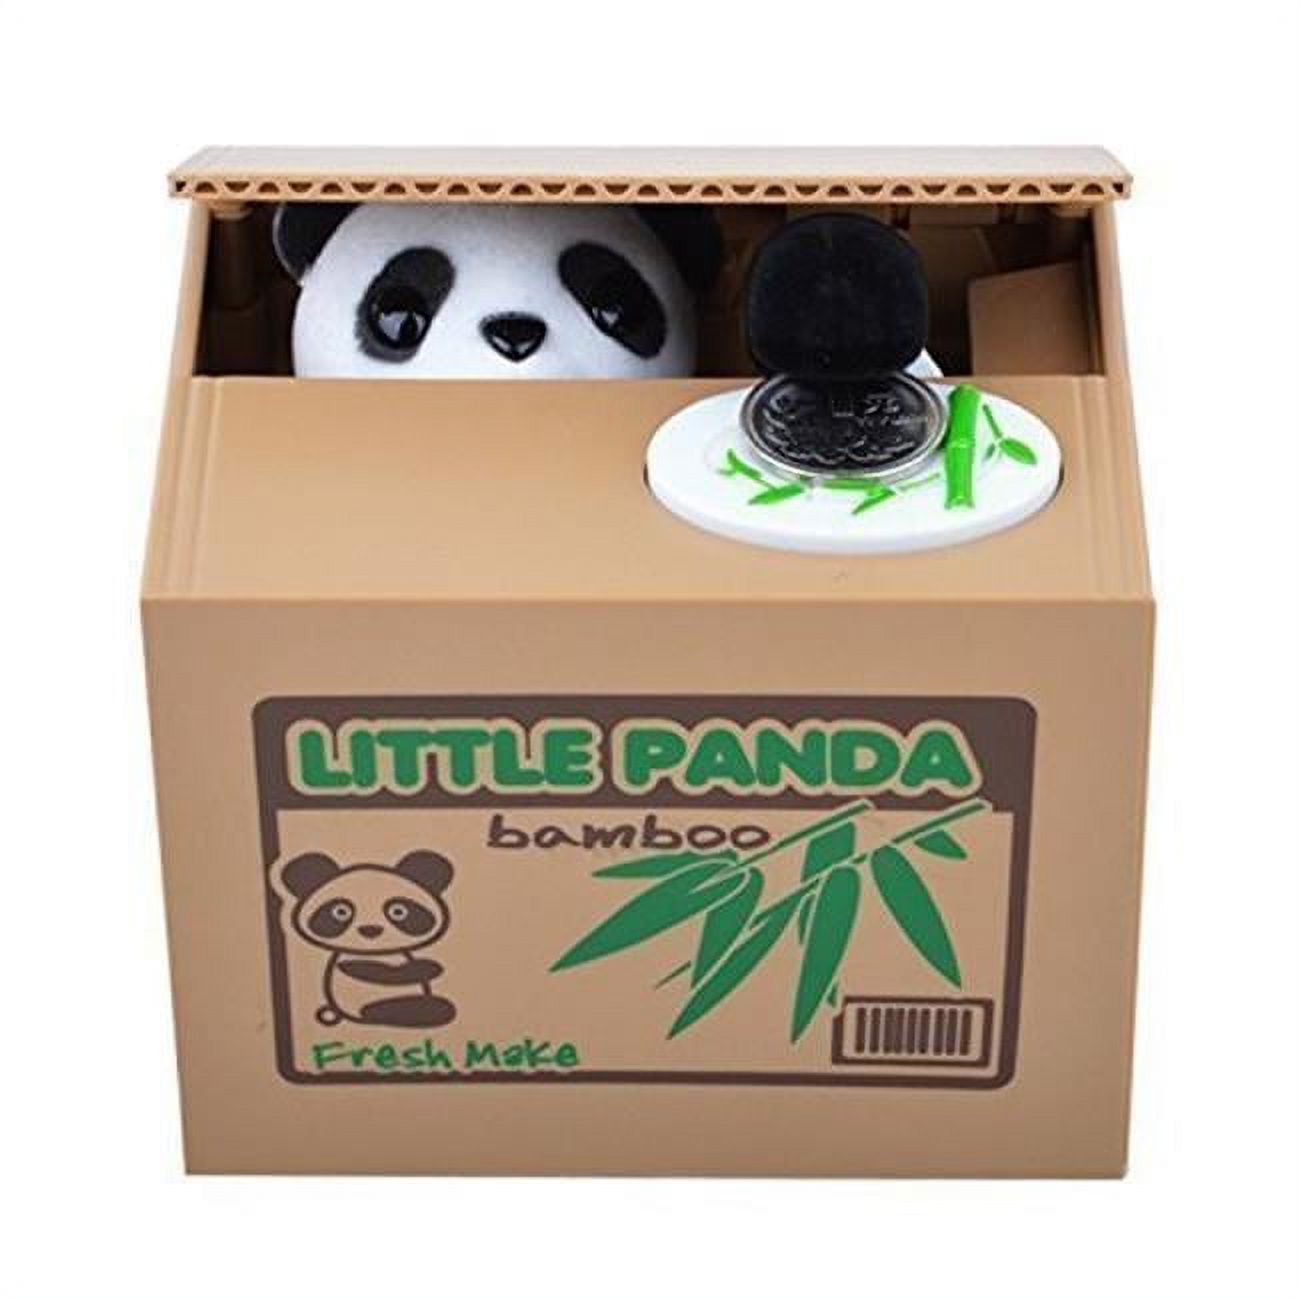 Picture of Azimport MPT608 Panda Coin Bank